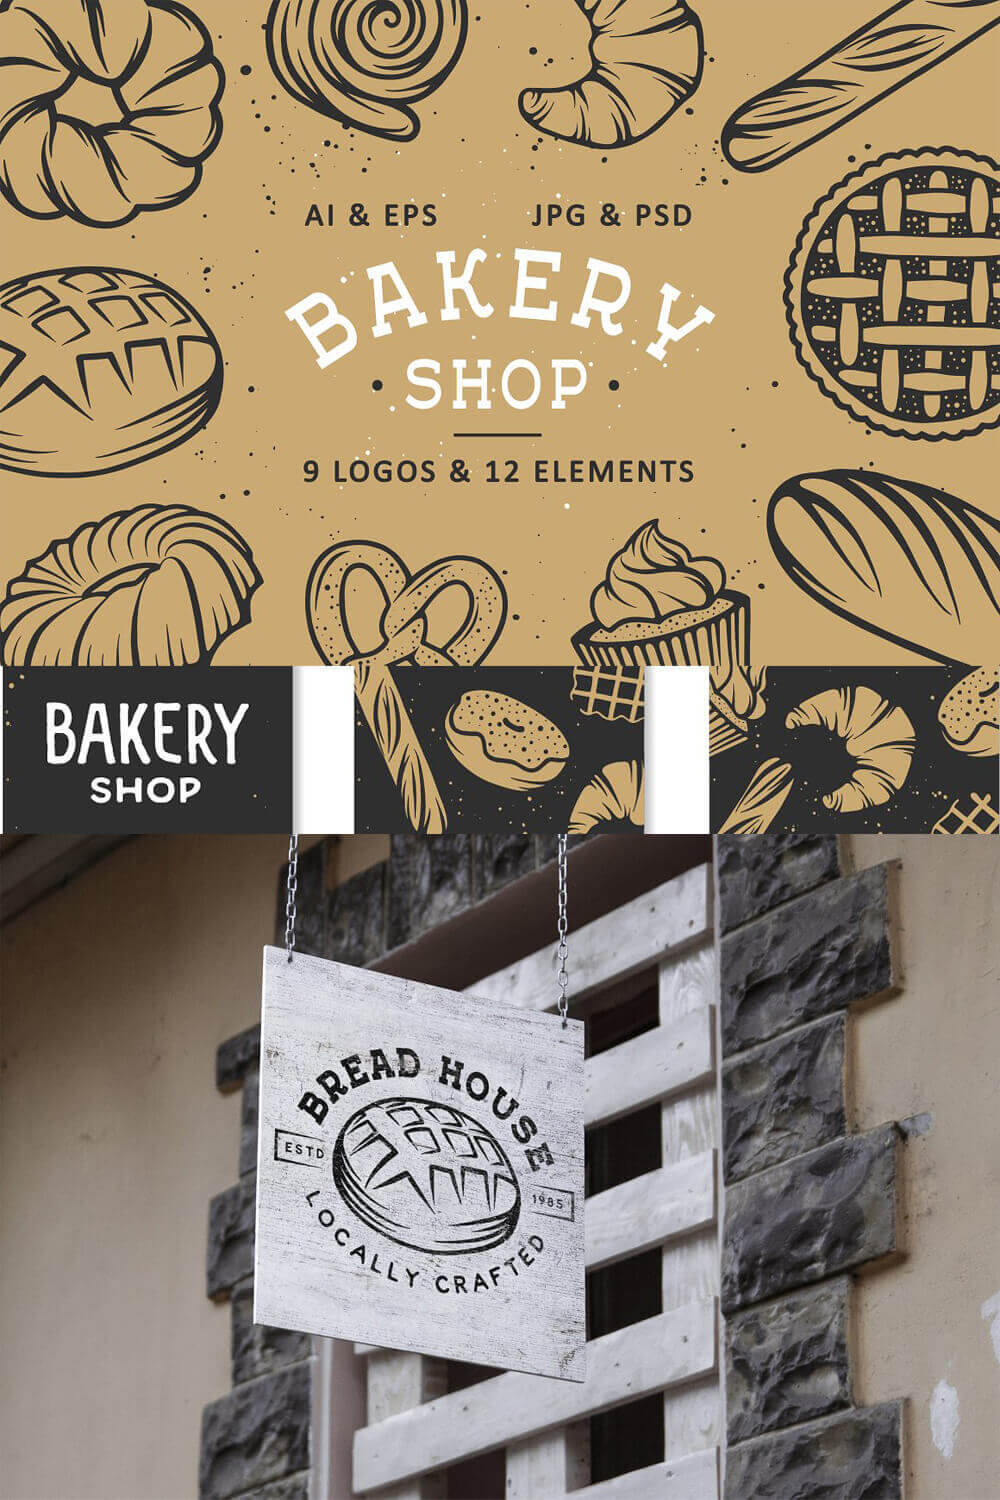 Top logo and elements of the bakery on a yellowish background, black and white sign - white plywood on chains at the entrance.